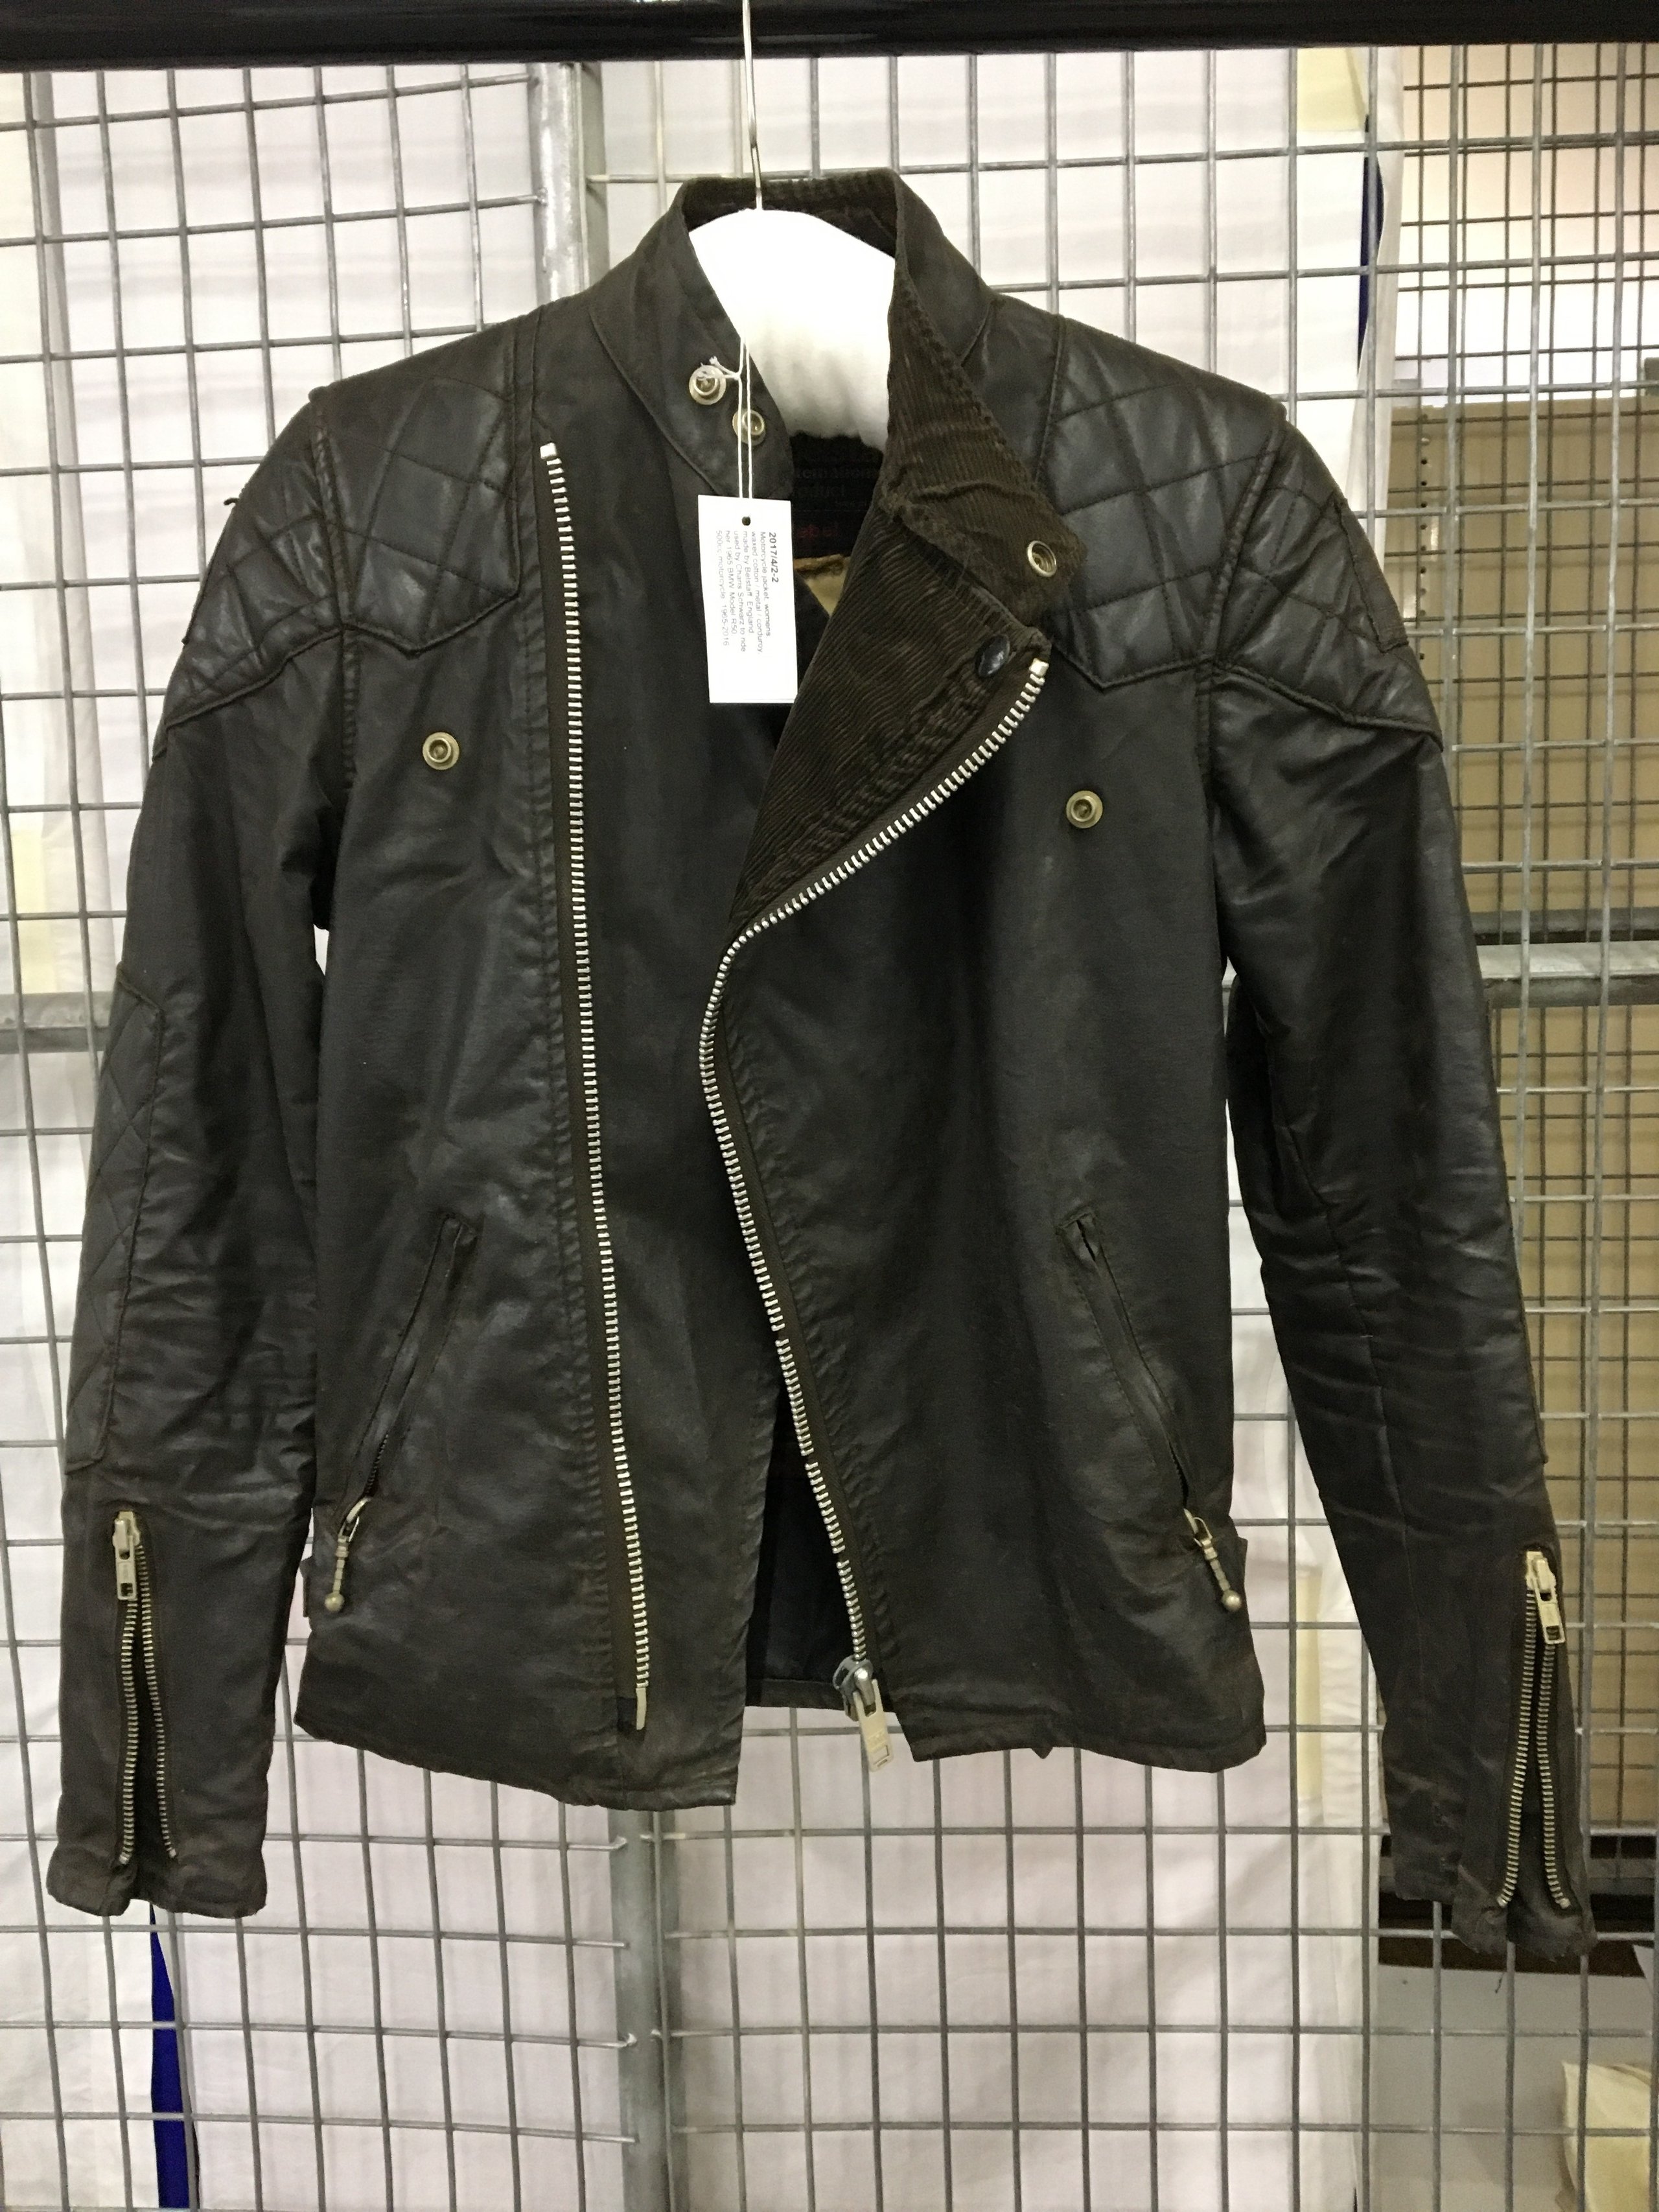 Powerhouse Collection - Belstaff motorcycle jacket used by Charis Schwarz